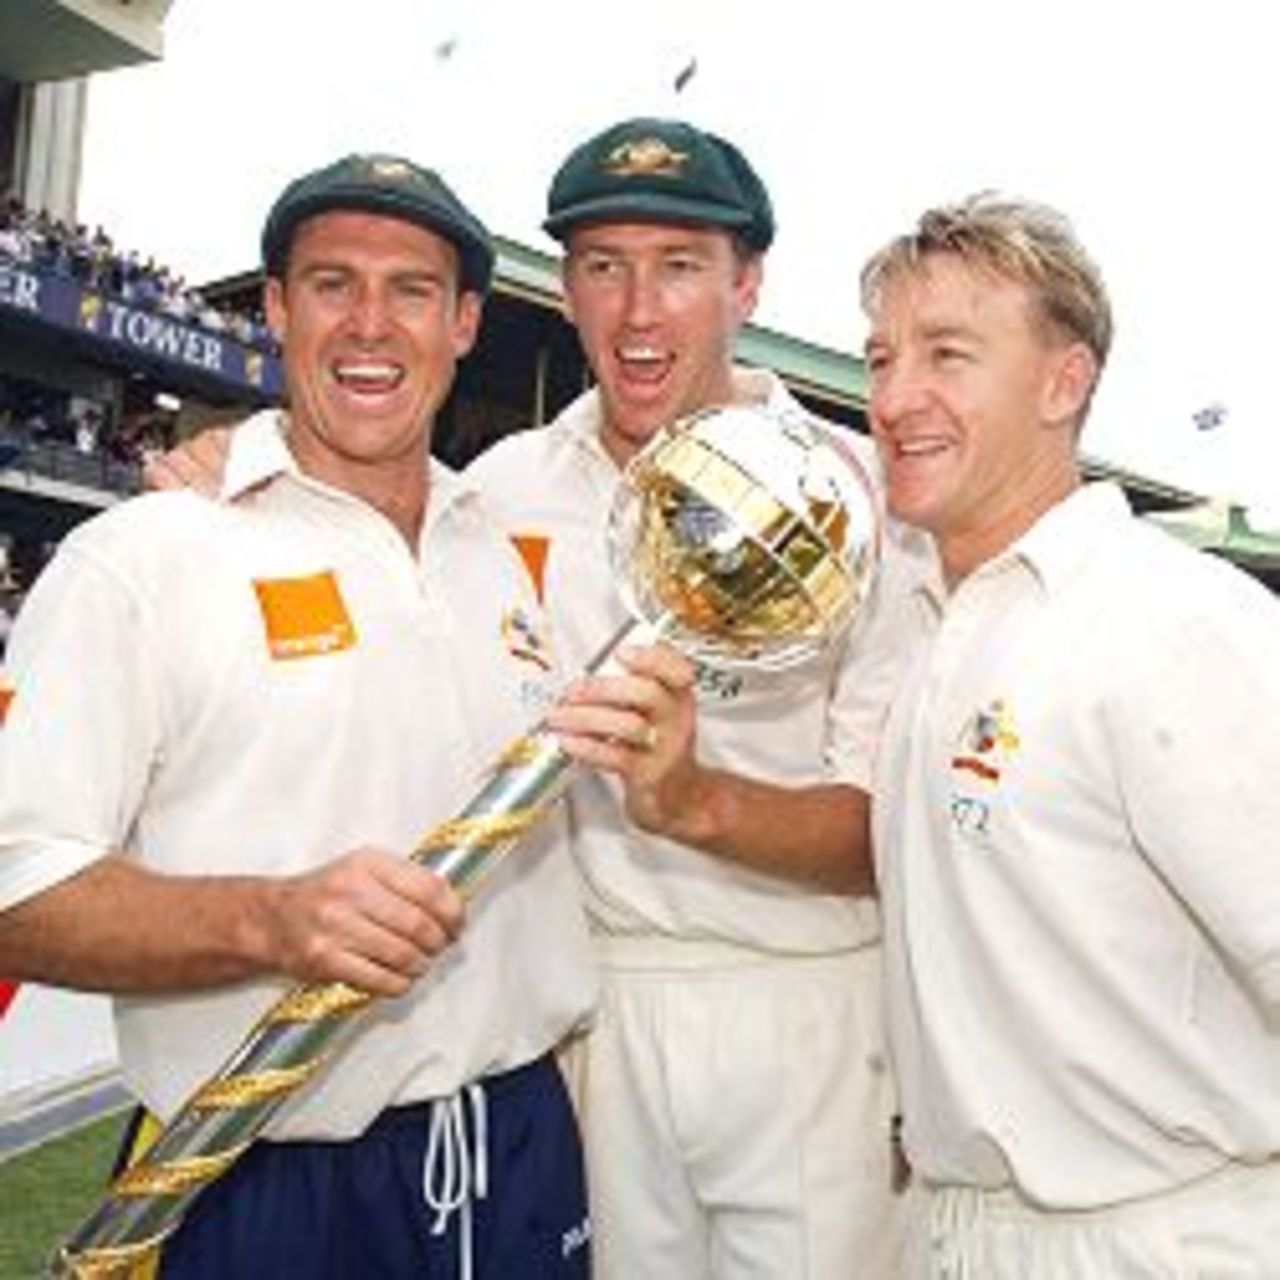 05 Jan 2002: Matthew hayden, Glenn McGrath and 12th man Andy Bichel celebrate Australia's win during the fourth day's play in the third test match between Australia and South Africa held at the Sydney Cricket Ground, Sydney, Australia.